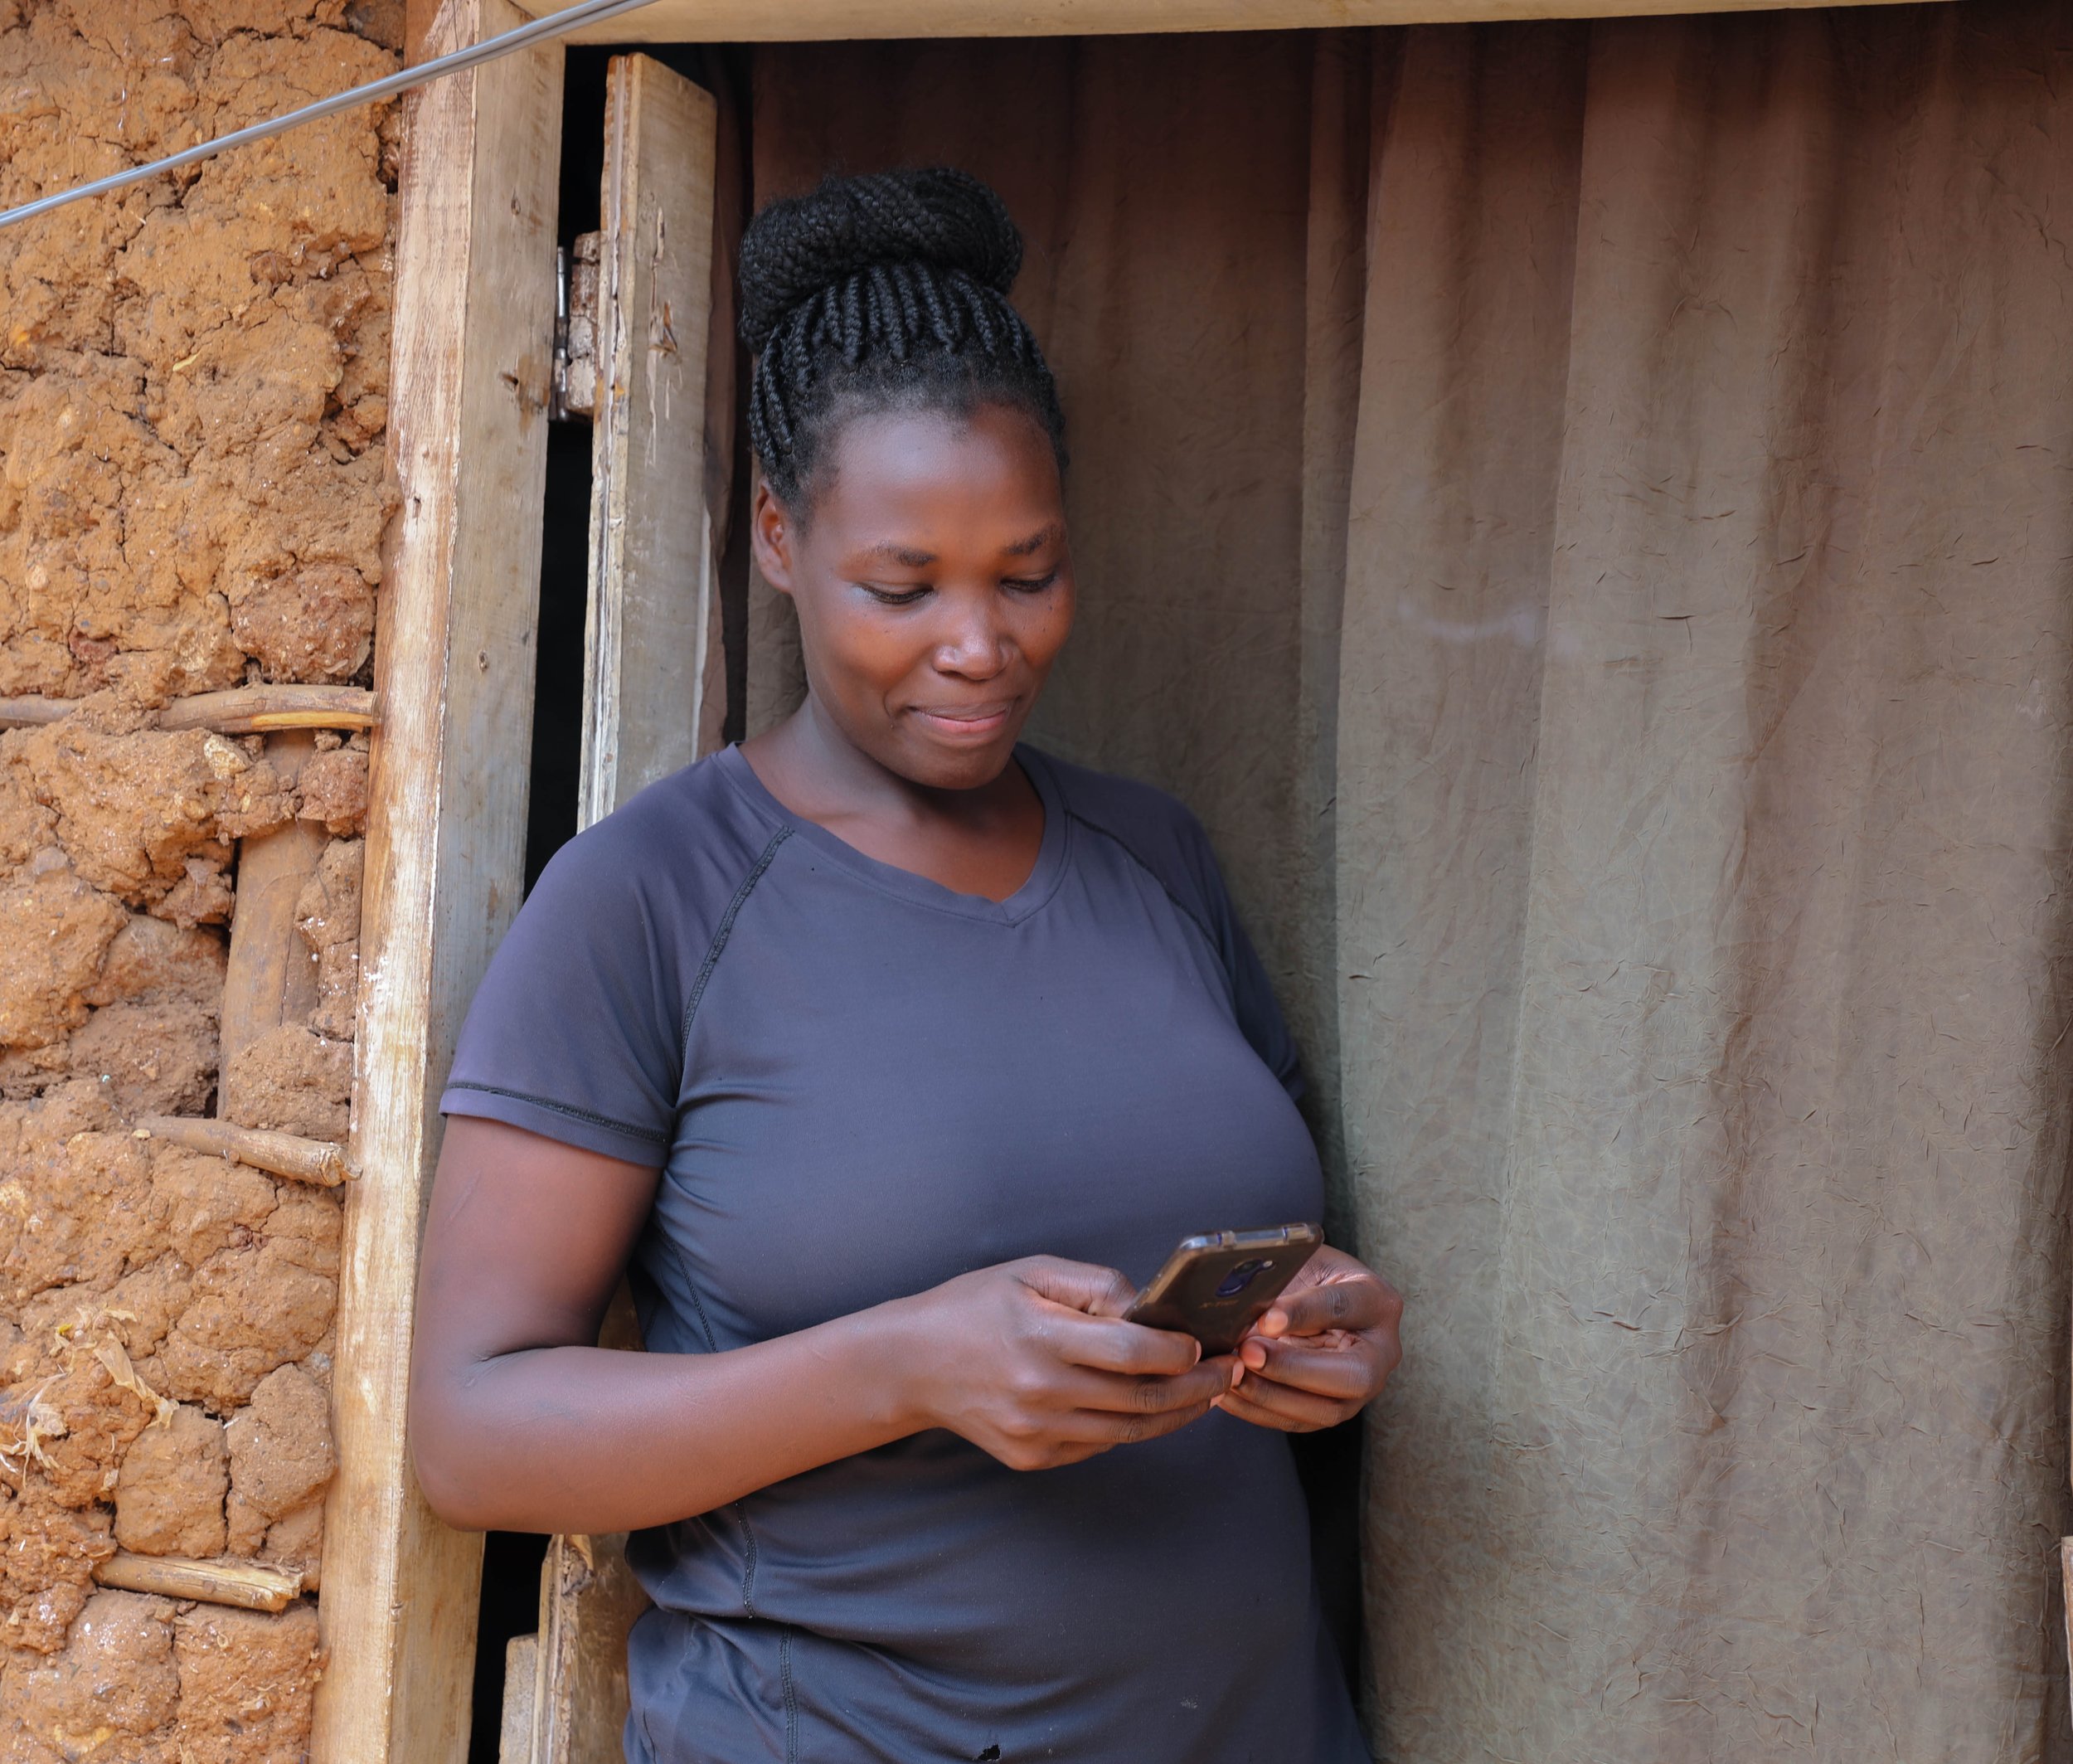 Lilian stands outside her home in Kibera, a large informal settlement in Nairobi. She signed up for PROMPTS when pregnant with her third child, and quickly found that it not only a channel for advice and information during pregnancy, but somewhere she could report on her experiences of care - both clinical and respectful - in her local health facility. ‘I give my feedback so women in my community have a better chance of giving birth safely.’ she says.